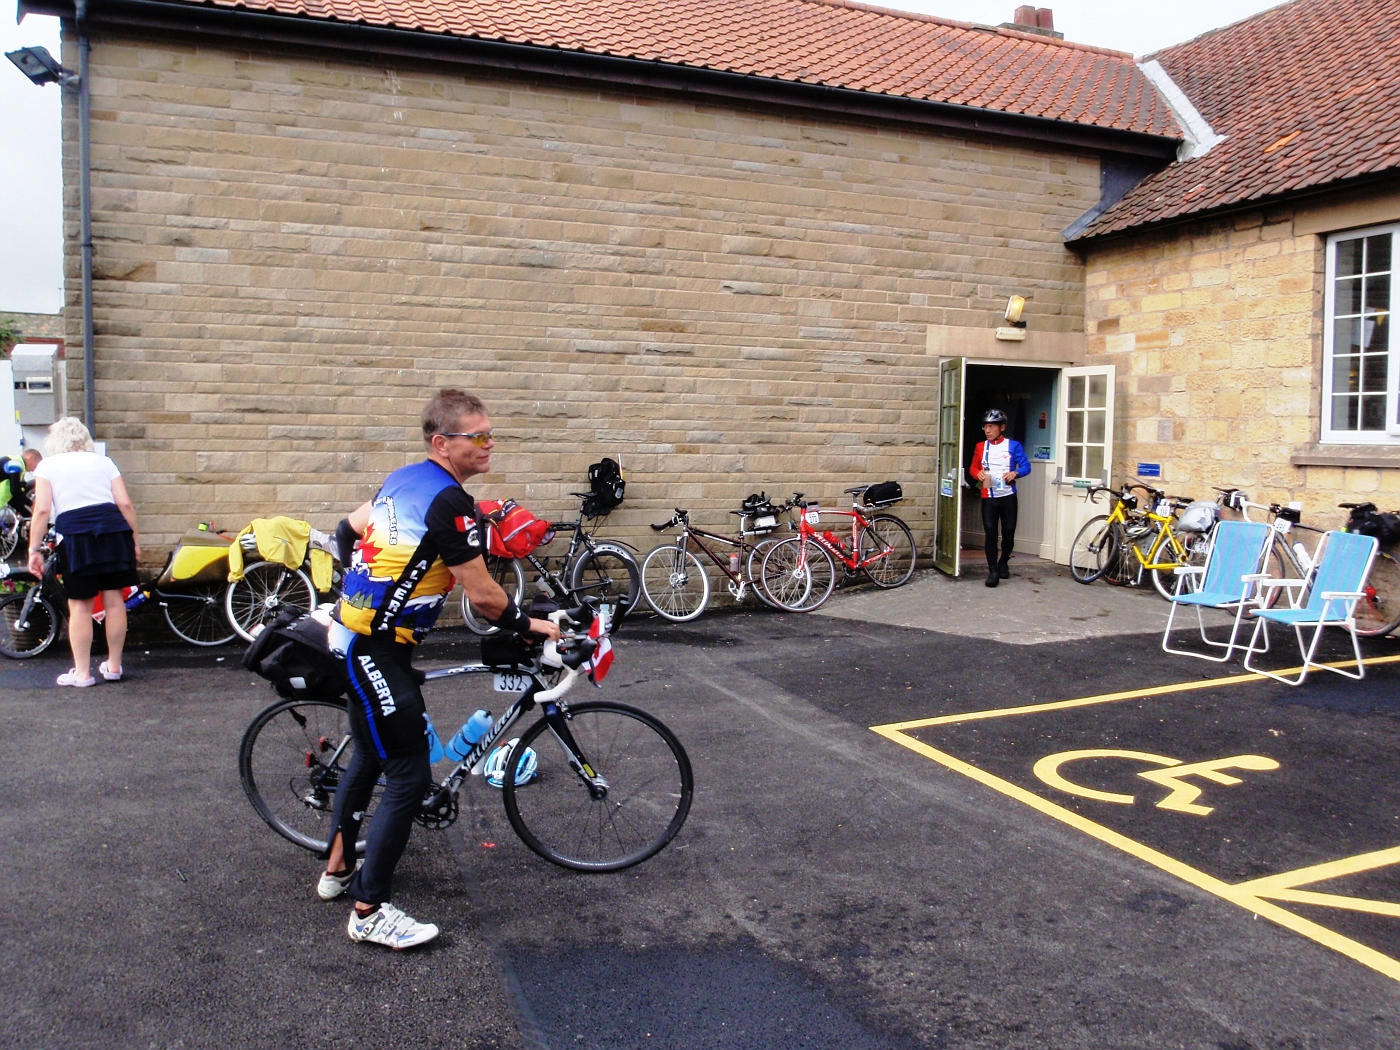 The Canadian rider Peter at control Coxwold